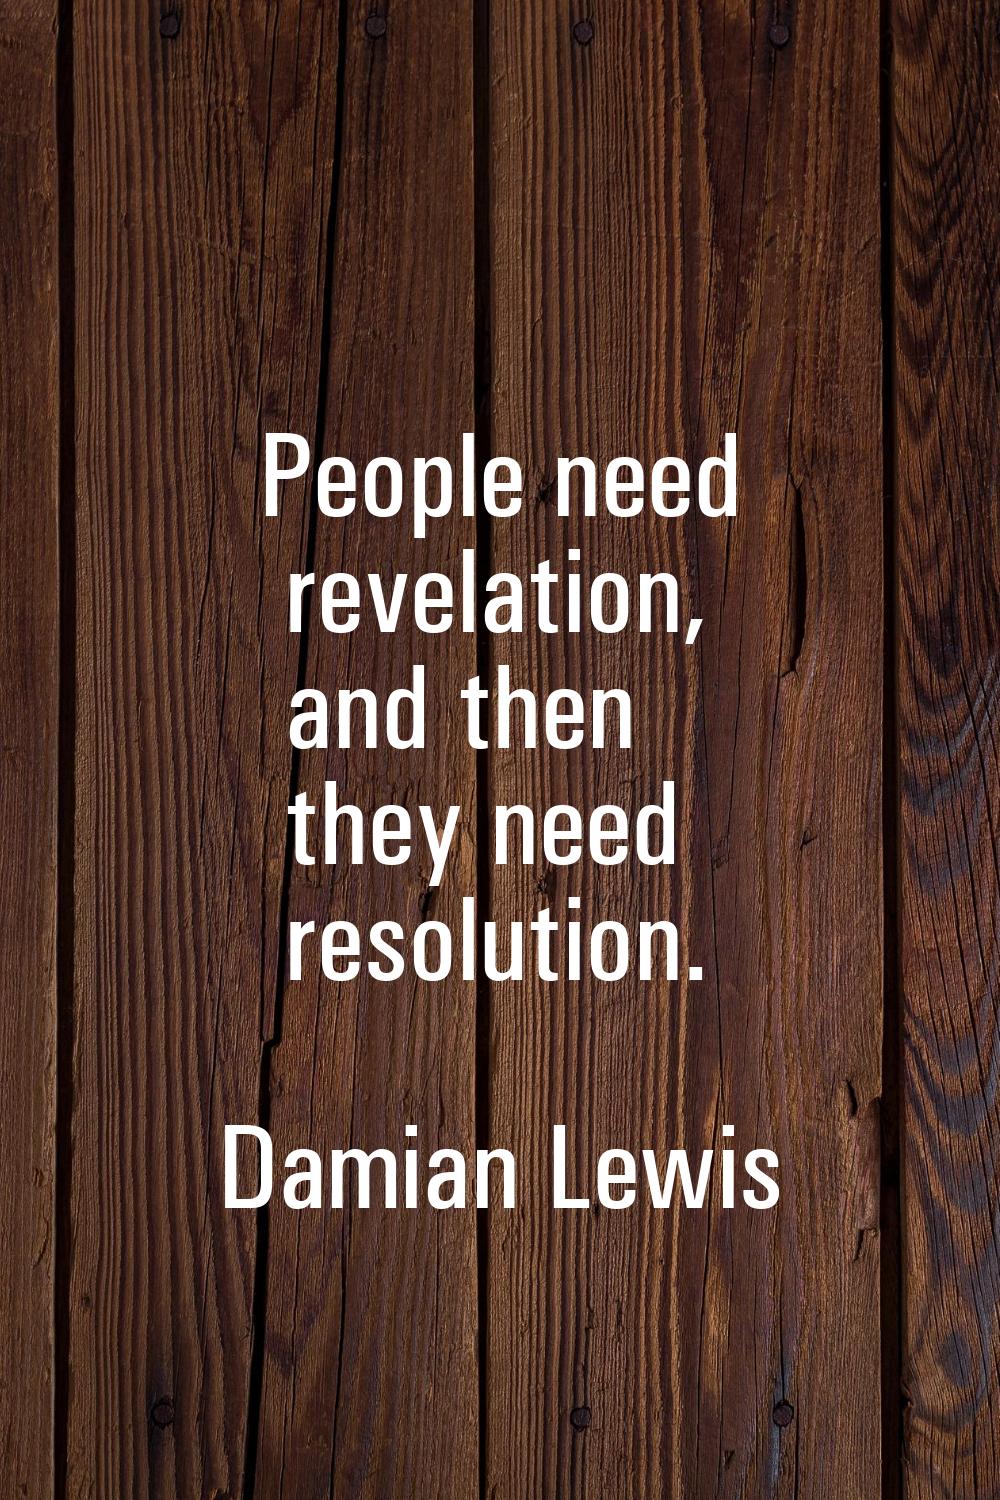 People need revelation, and then they need resolution.